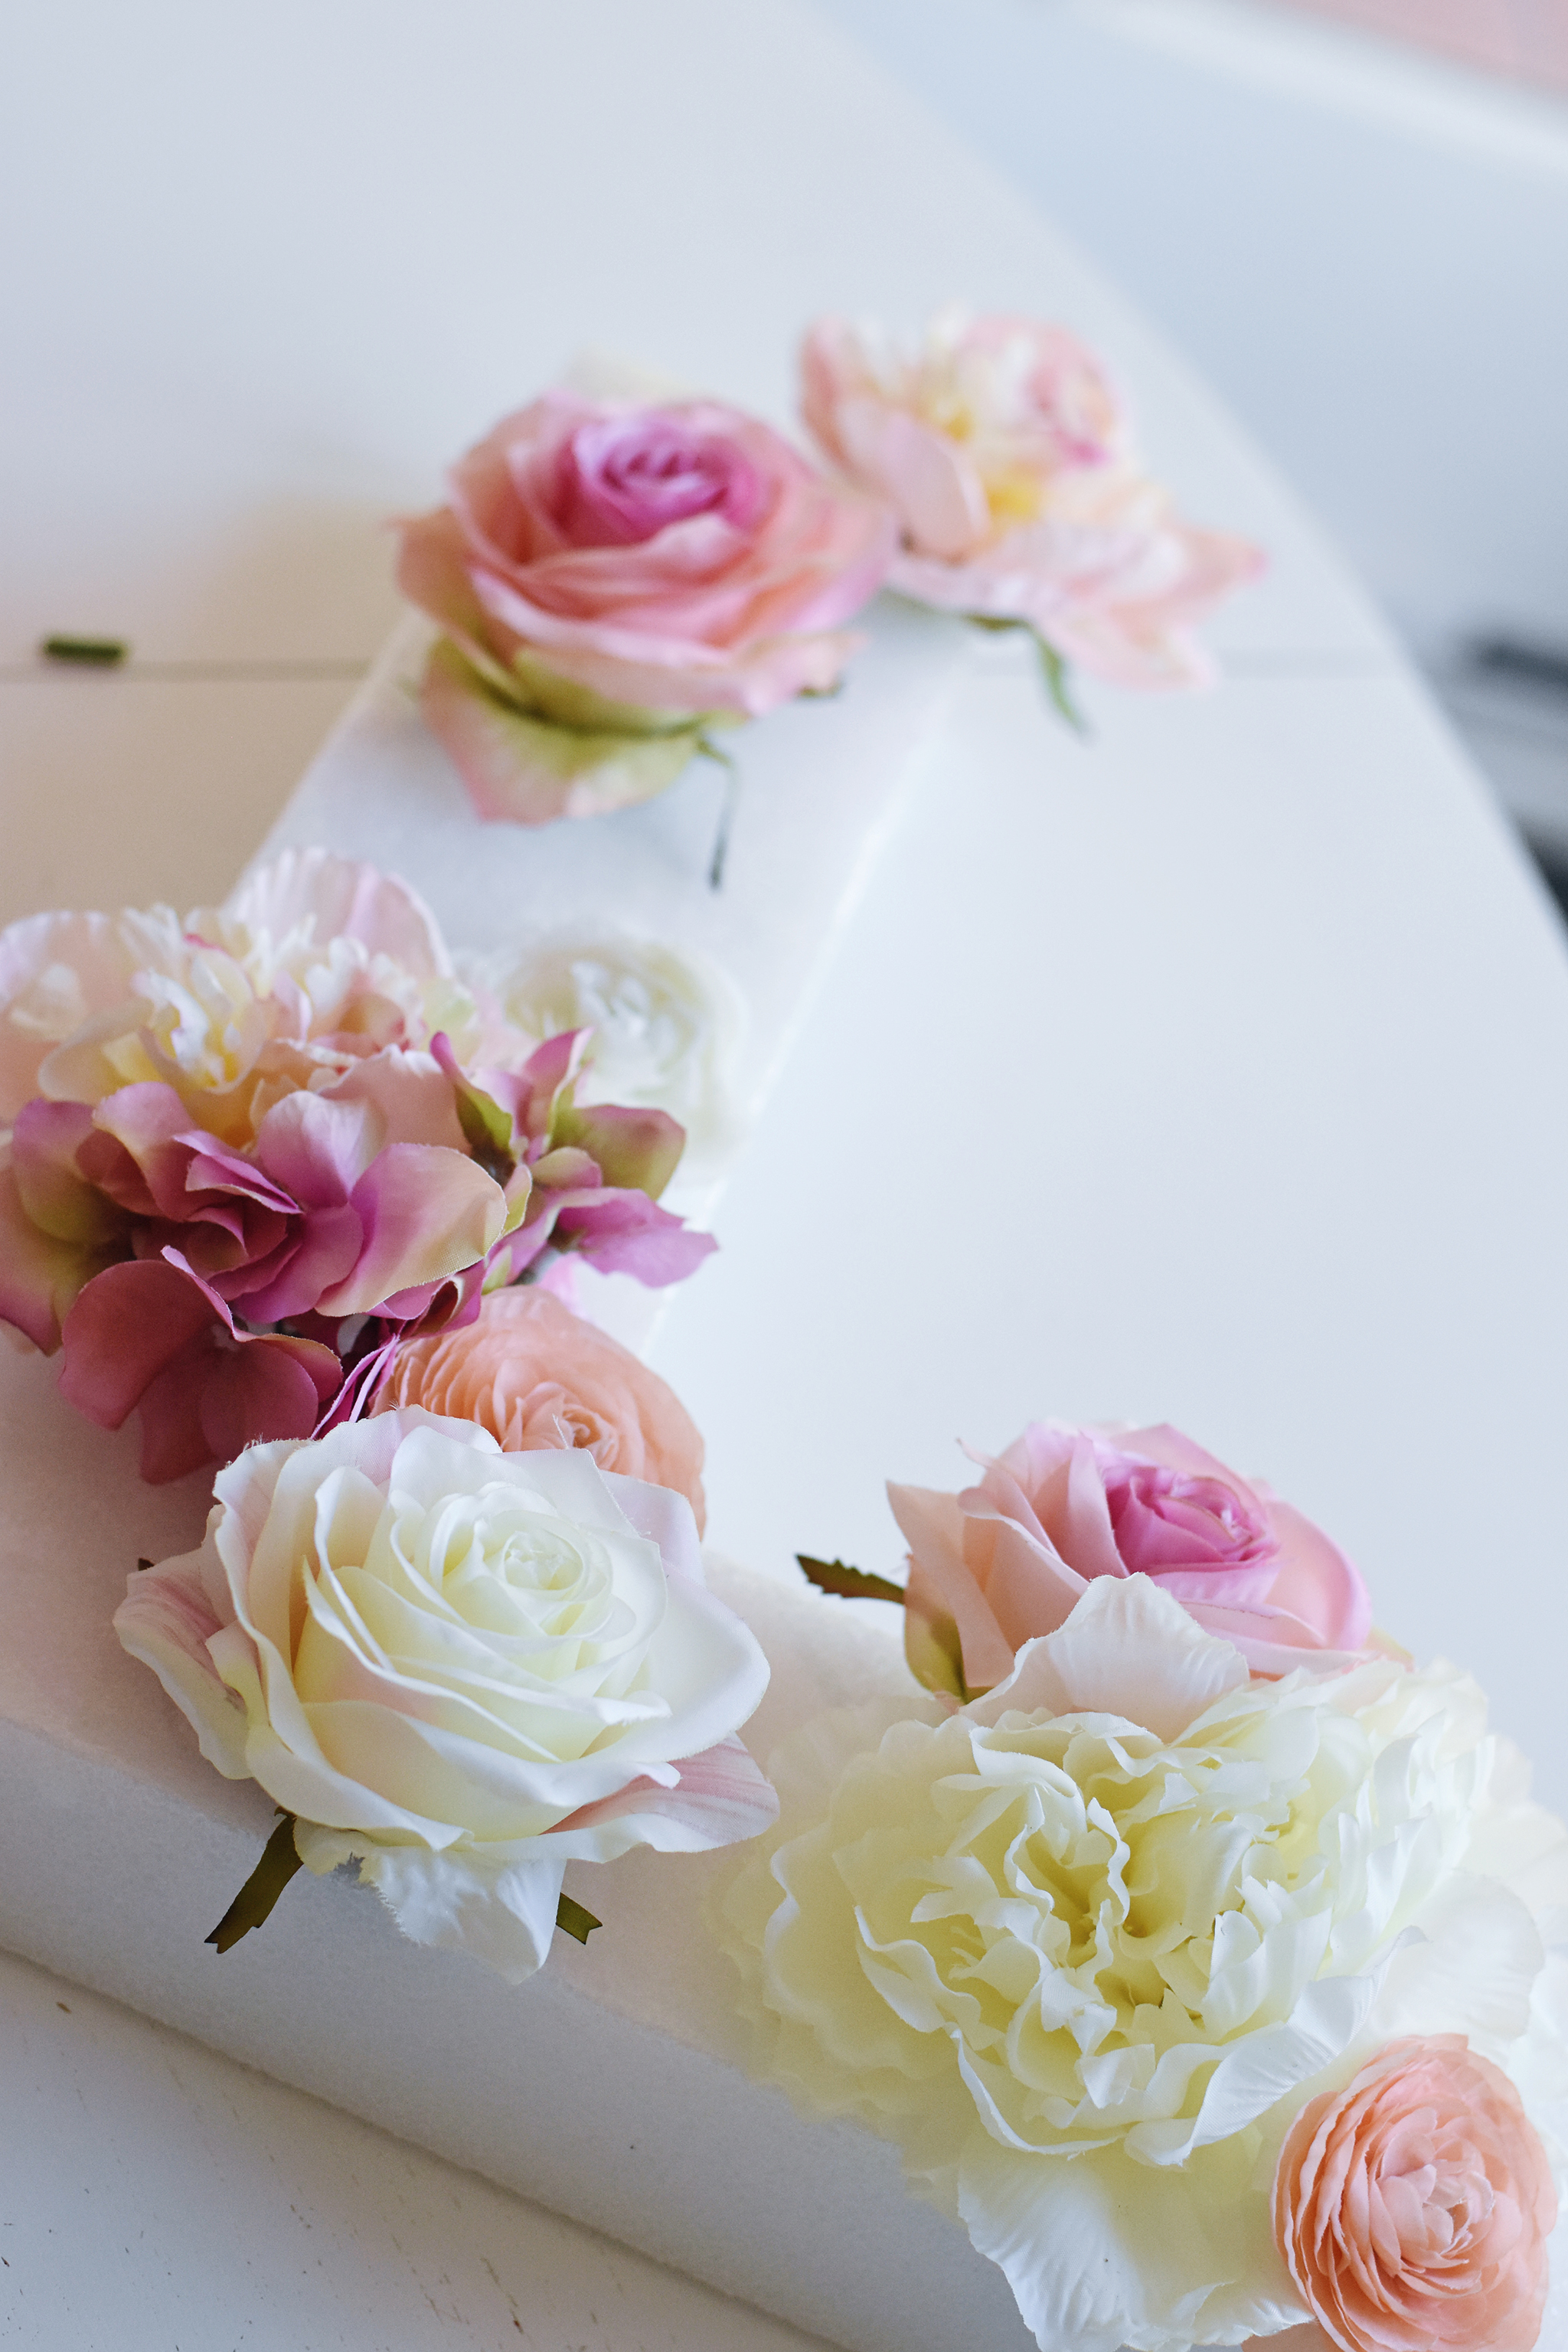 Start by placing your larger flowers first, then fill in with smaller ones.